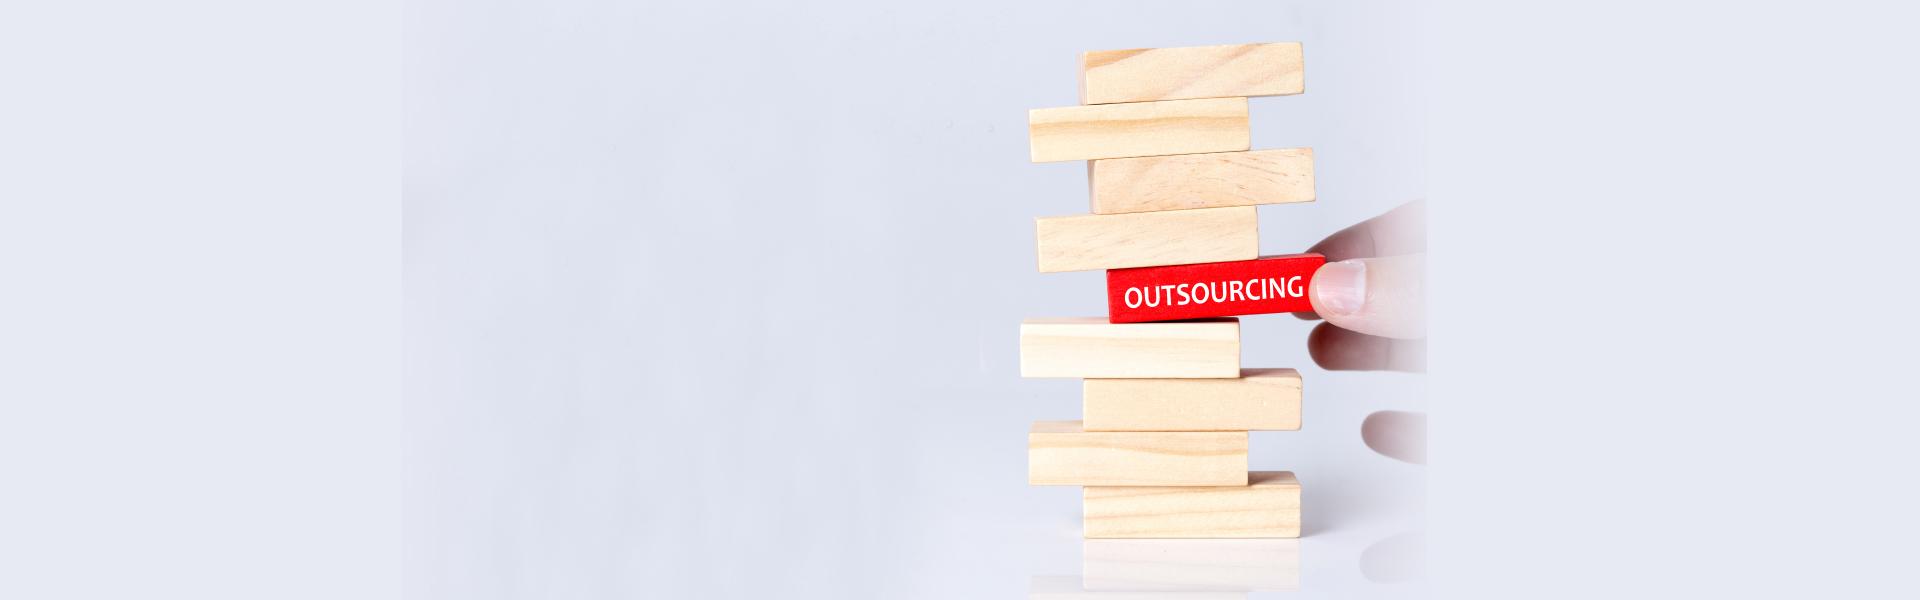 Recruitment Process Outsourcing for your Business - Exela HR Solutions